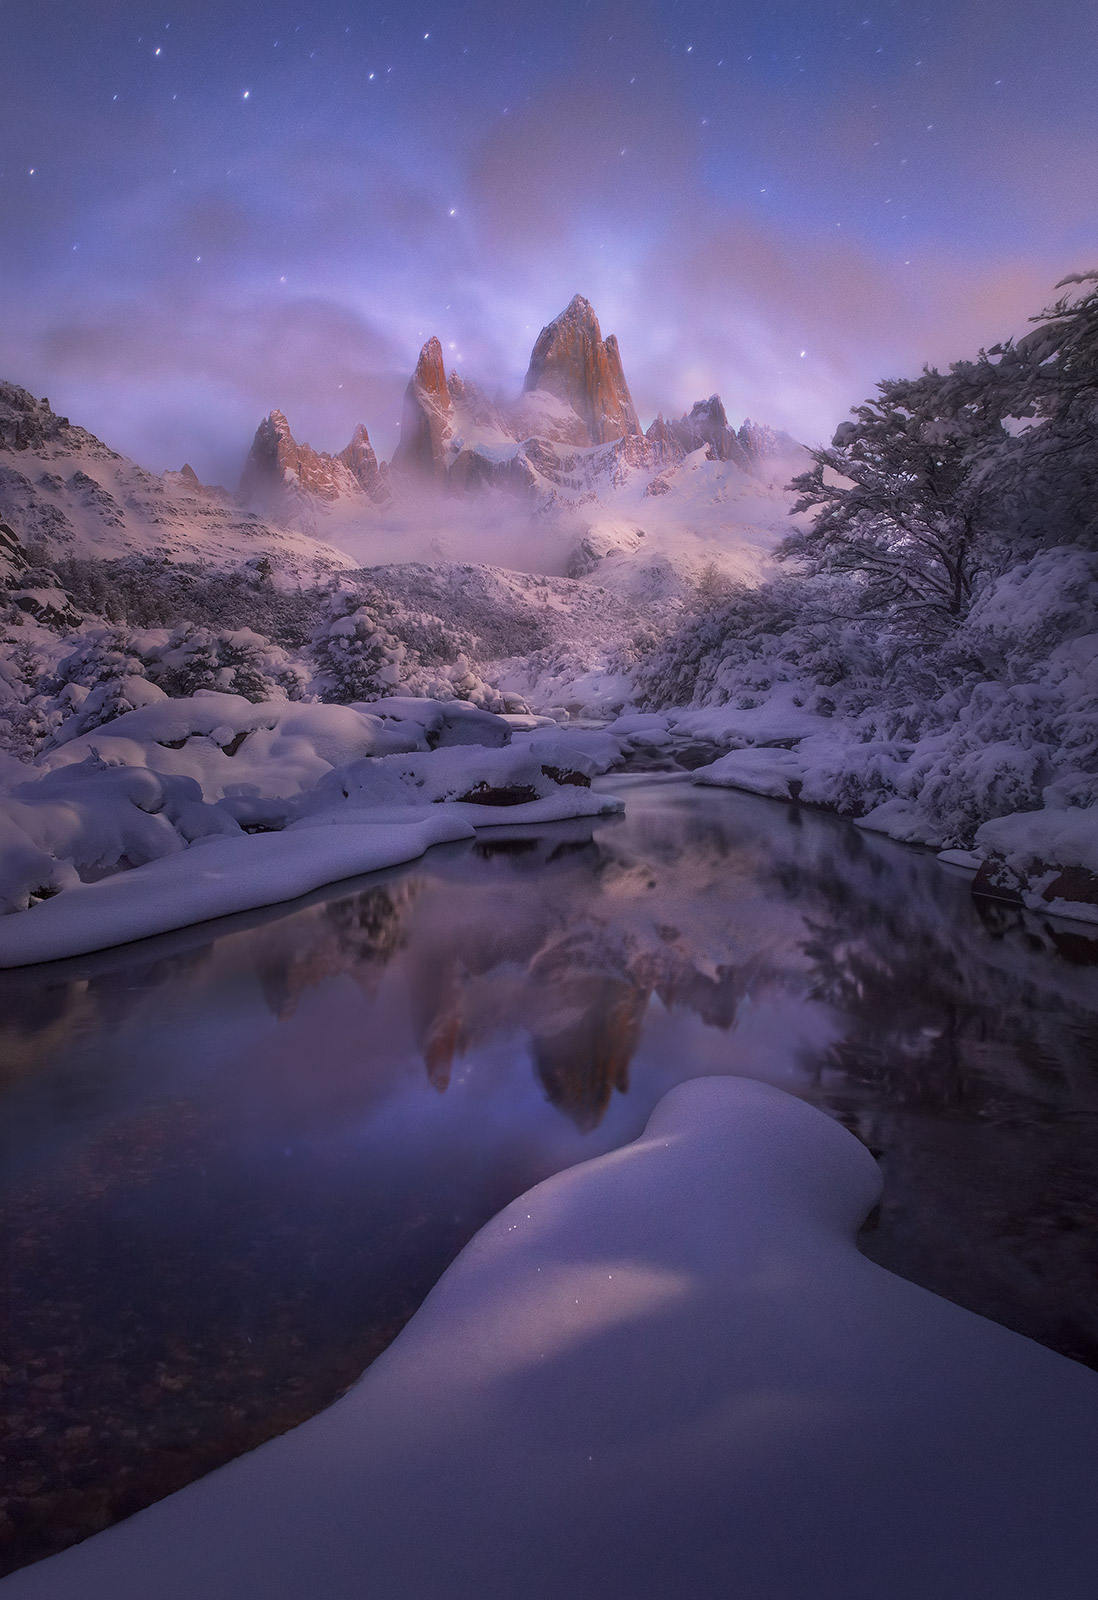 Soft moonlight illuminates a clearing Fitz Roy peak in Patagonia after a heavy winter snowfall.&nbsp;